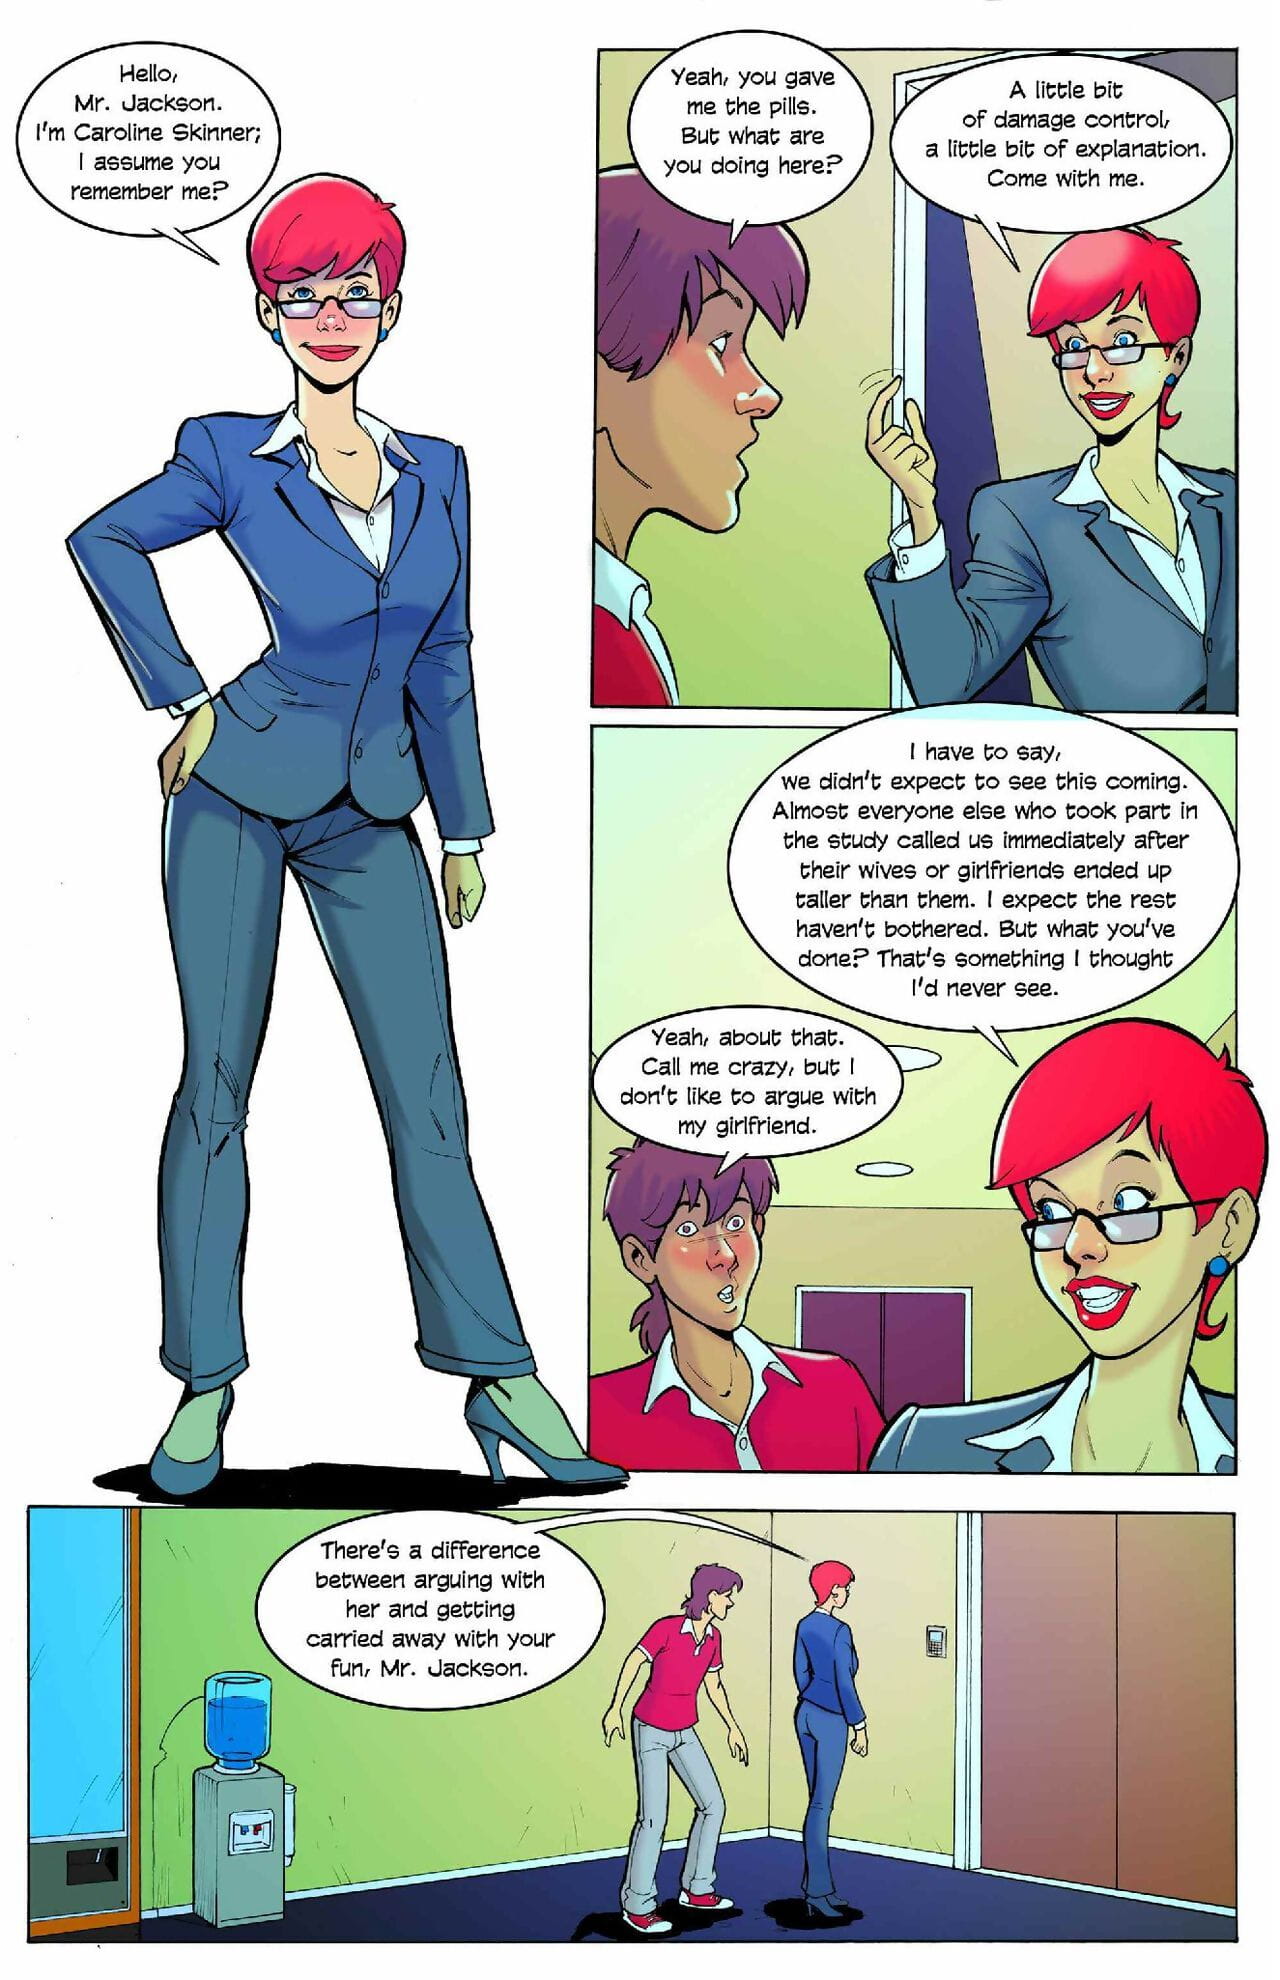 For her Pleasure Chapter 1 - 4 - part 2 page 1